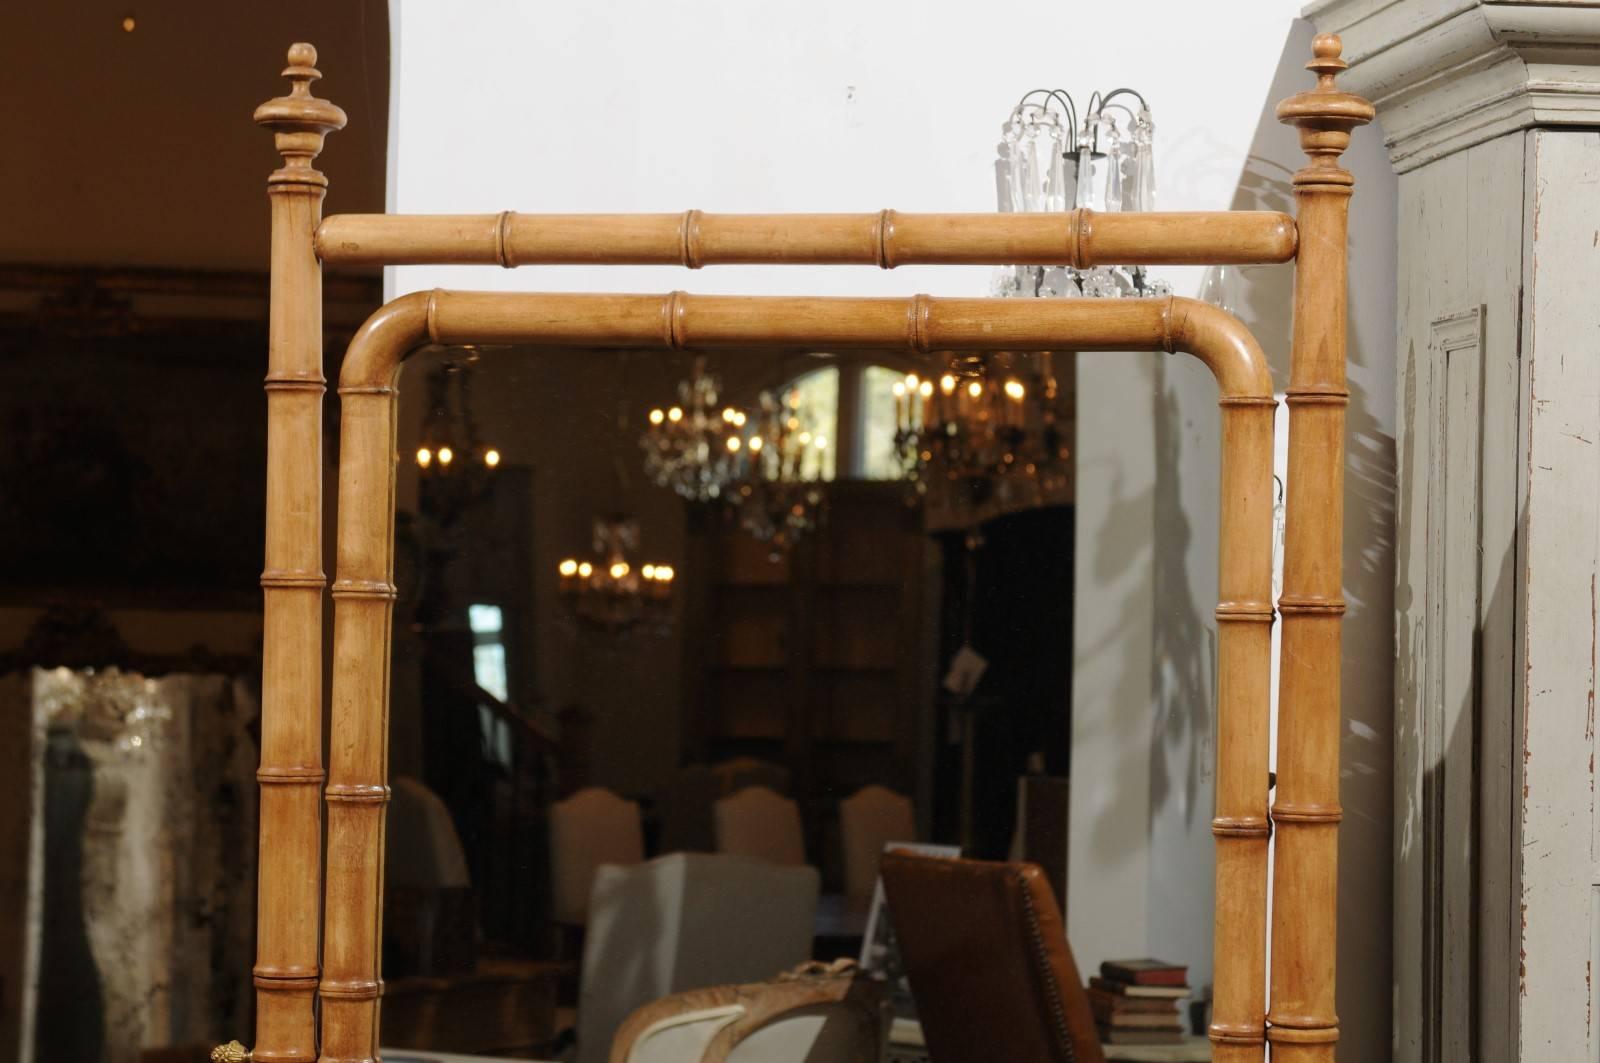 19th Century French Freestanding Faux-Bamboo Cheval Mirror with Saber Legs from the 1870s